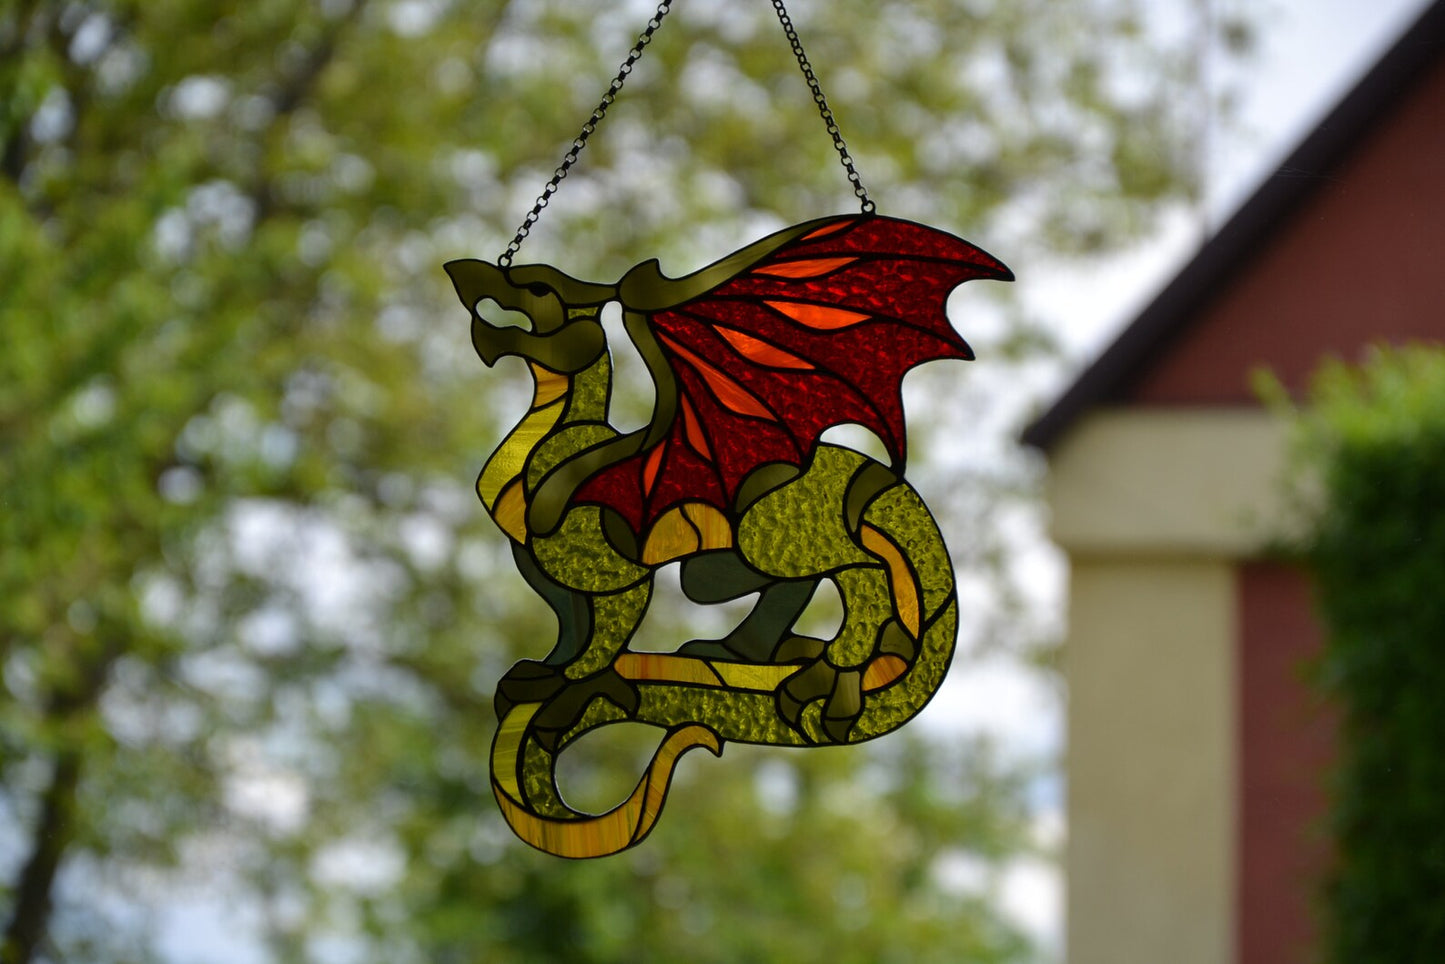 Winged dragon suncatcher Window hanging stained glass sun catcher Wall decor Gift for him Stain glass decor Stained glass sun catcher